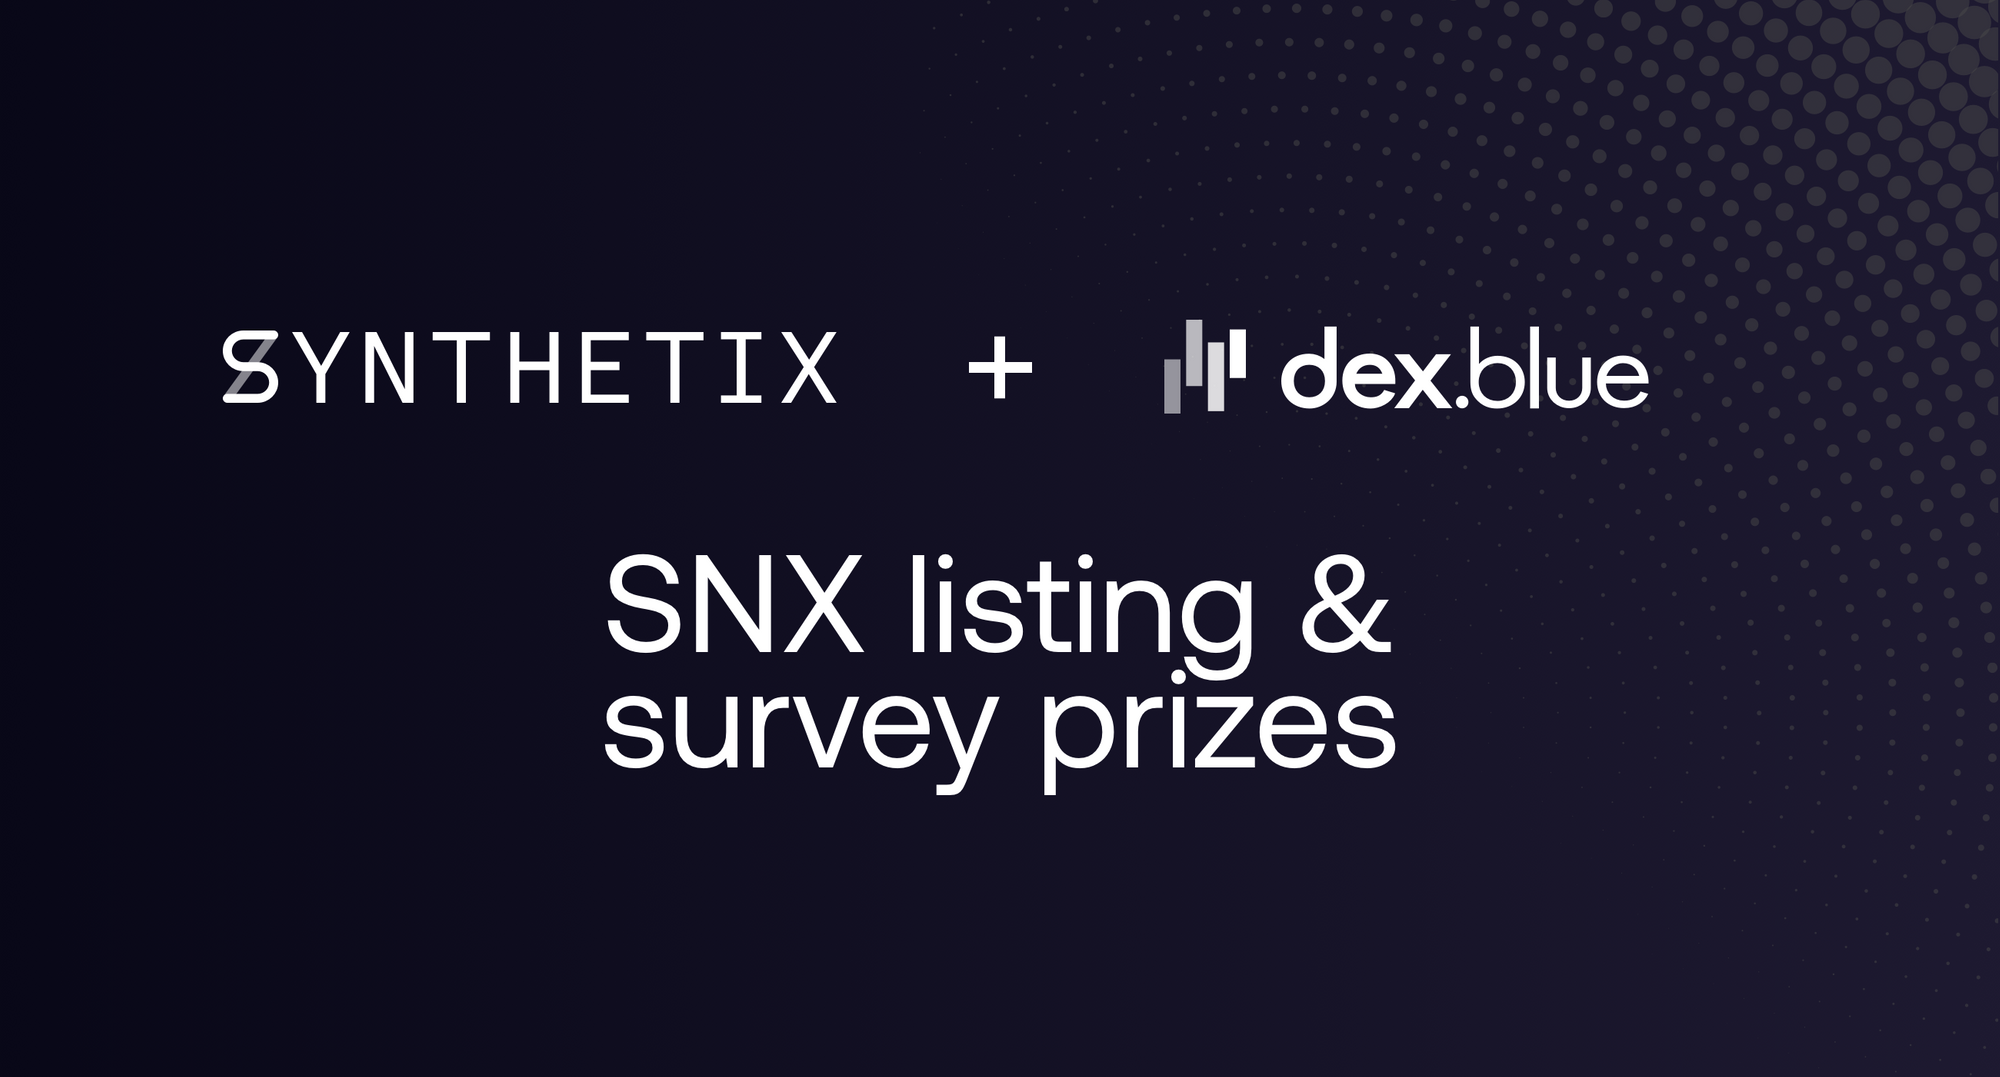 Complete this trading survey and WIN before SNX lists on dex.blue next week!